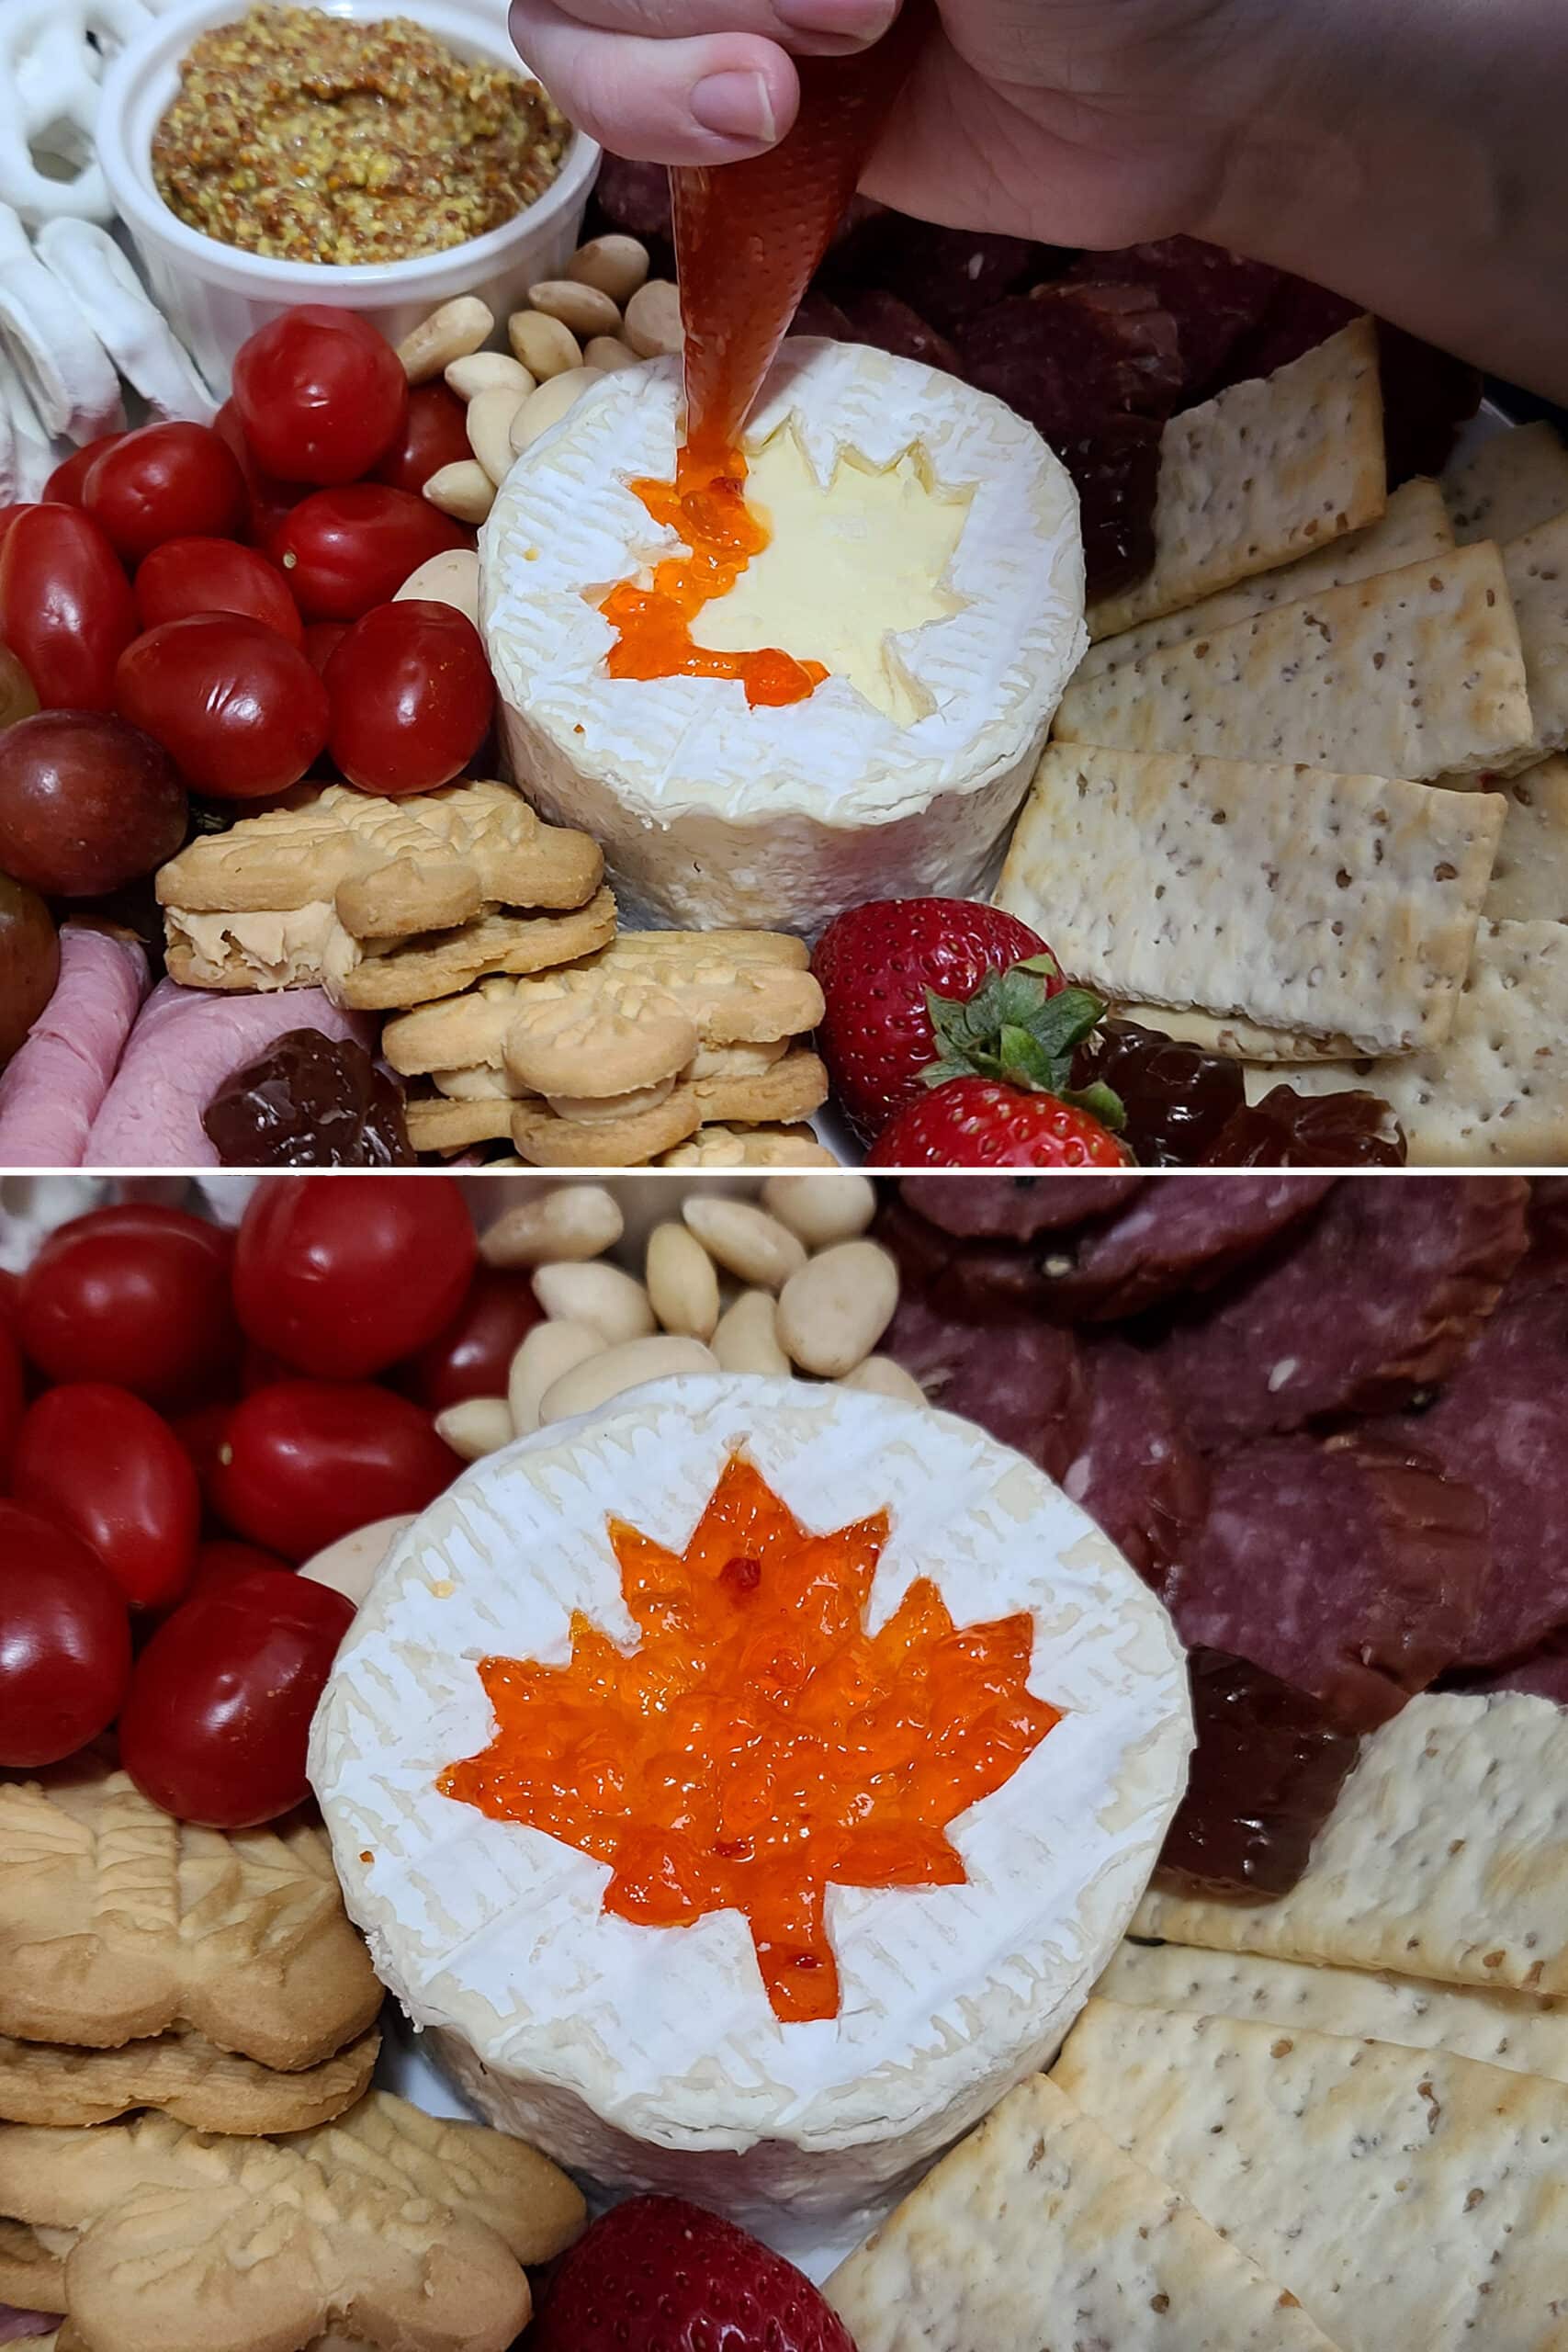 2 part image showing red pepper jelly being piped into a maple leaf shaped cutout on the top of a mini brie.